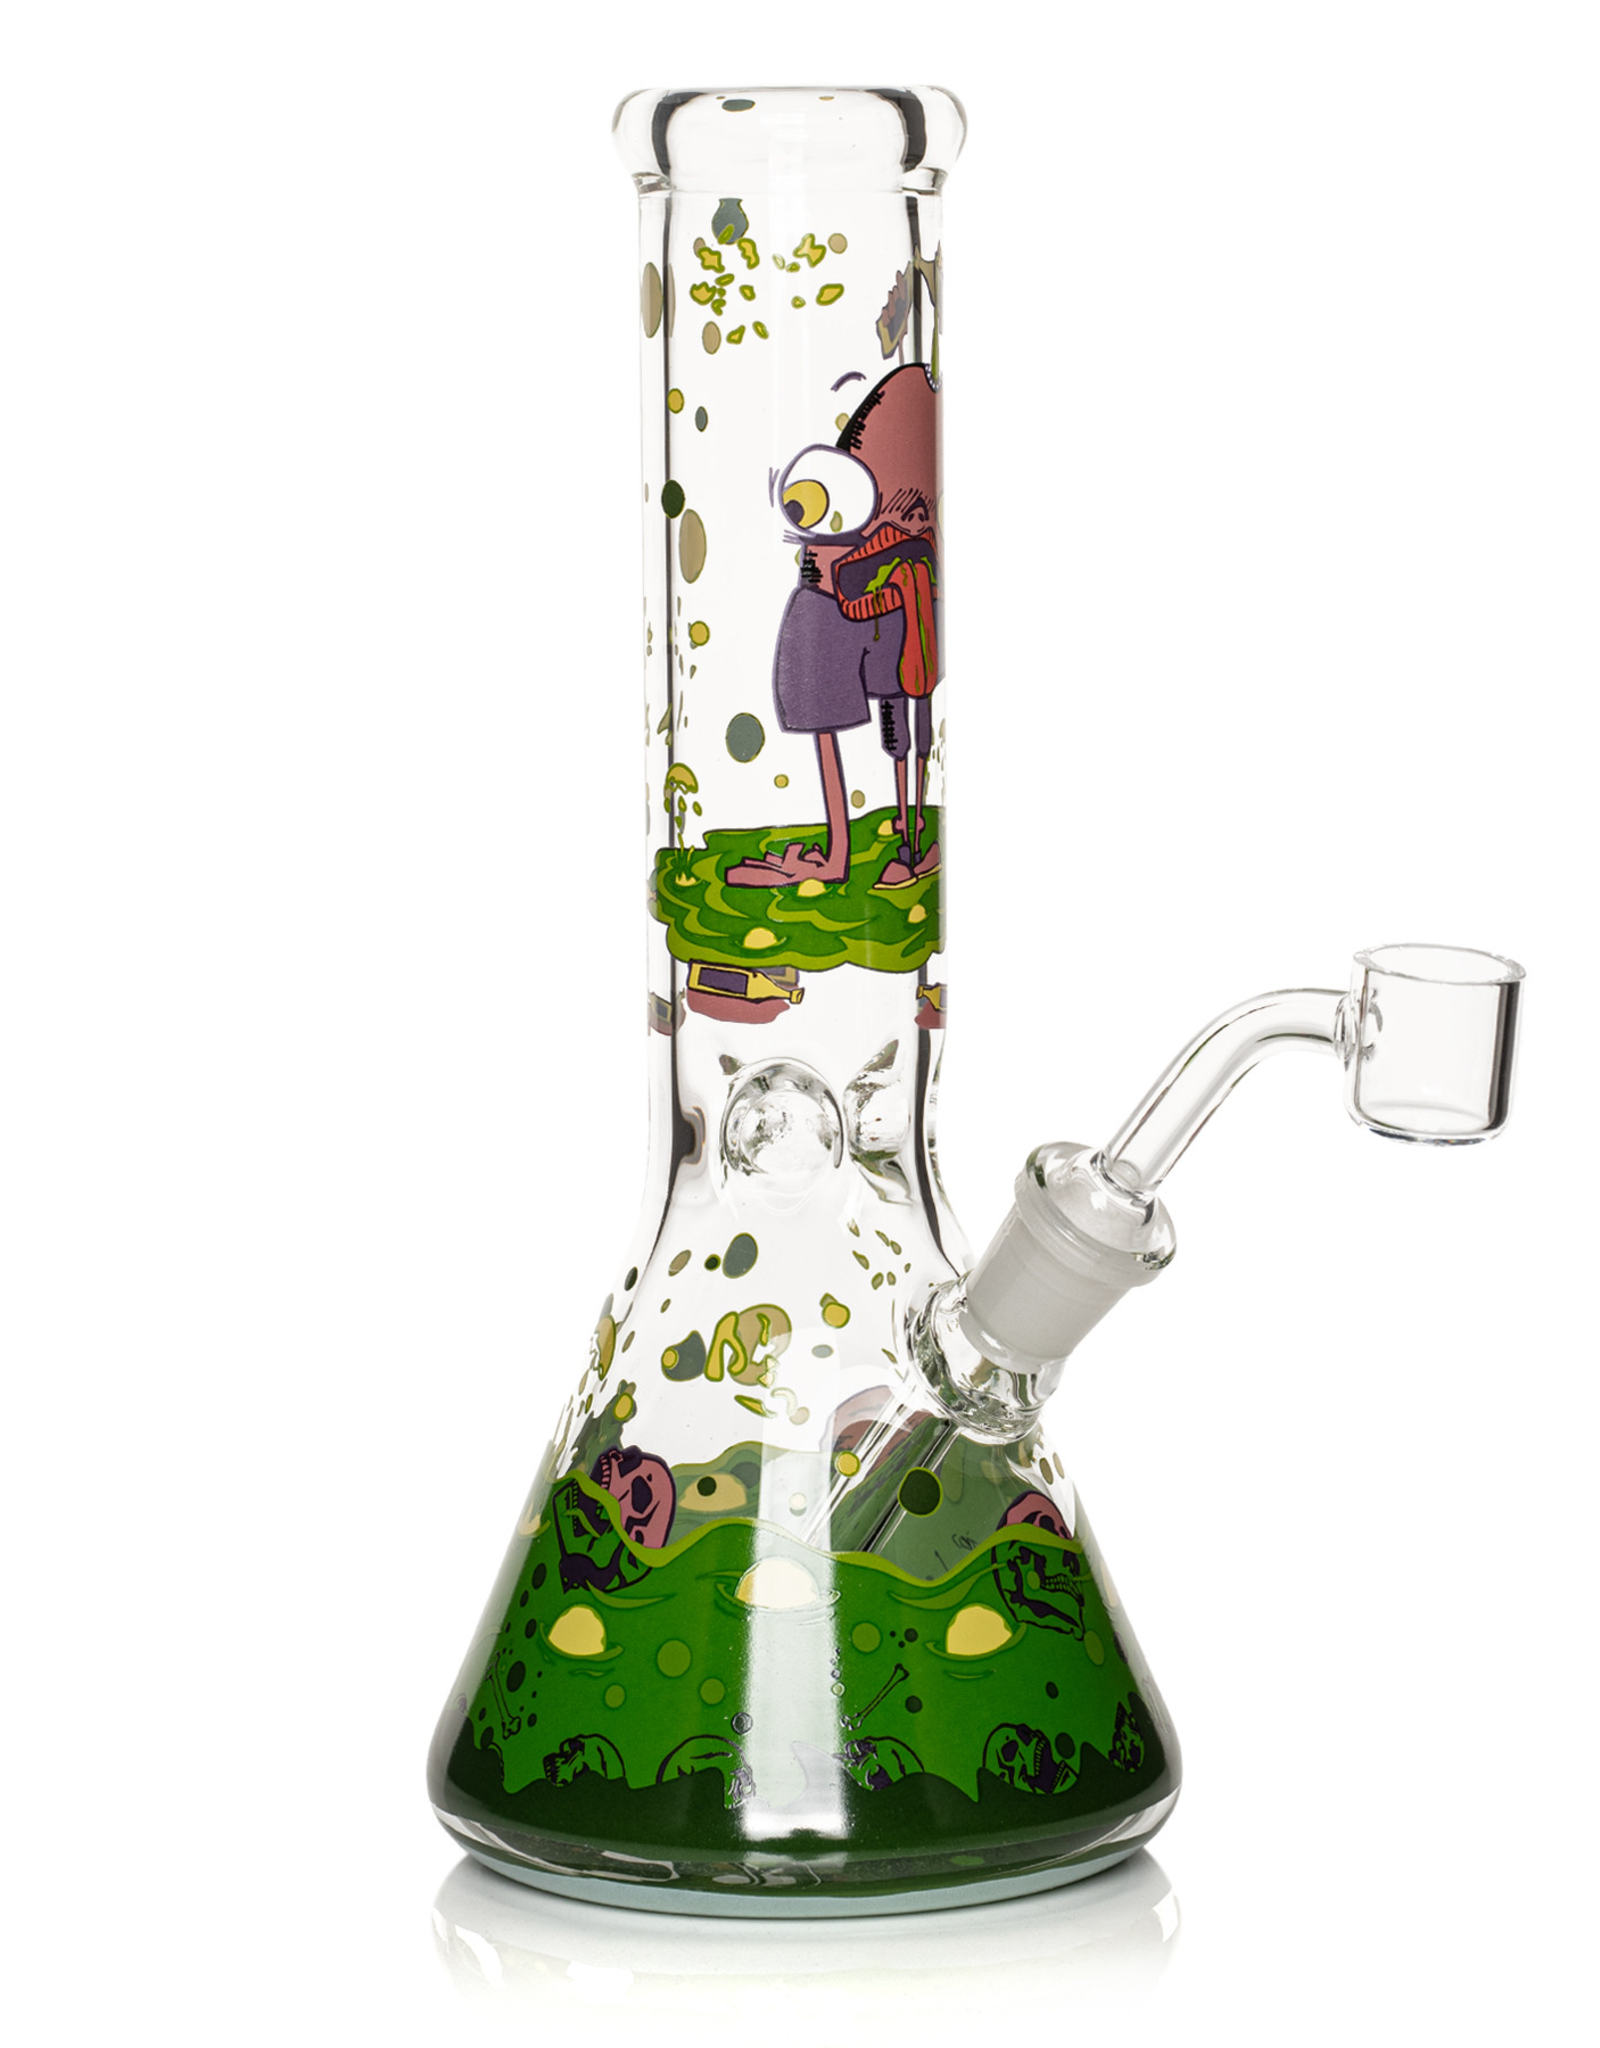 Red Eye Glass 8.5" Acid Bath Concentrate Rig by Red Eye Glass